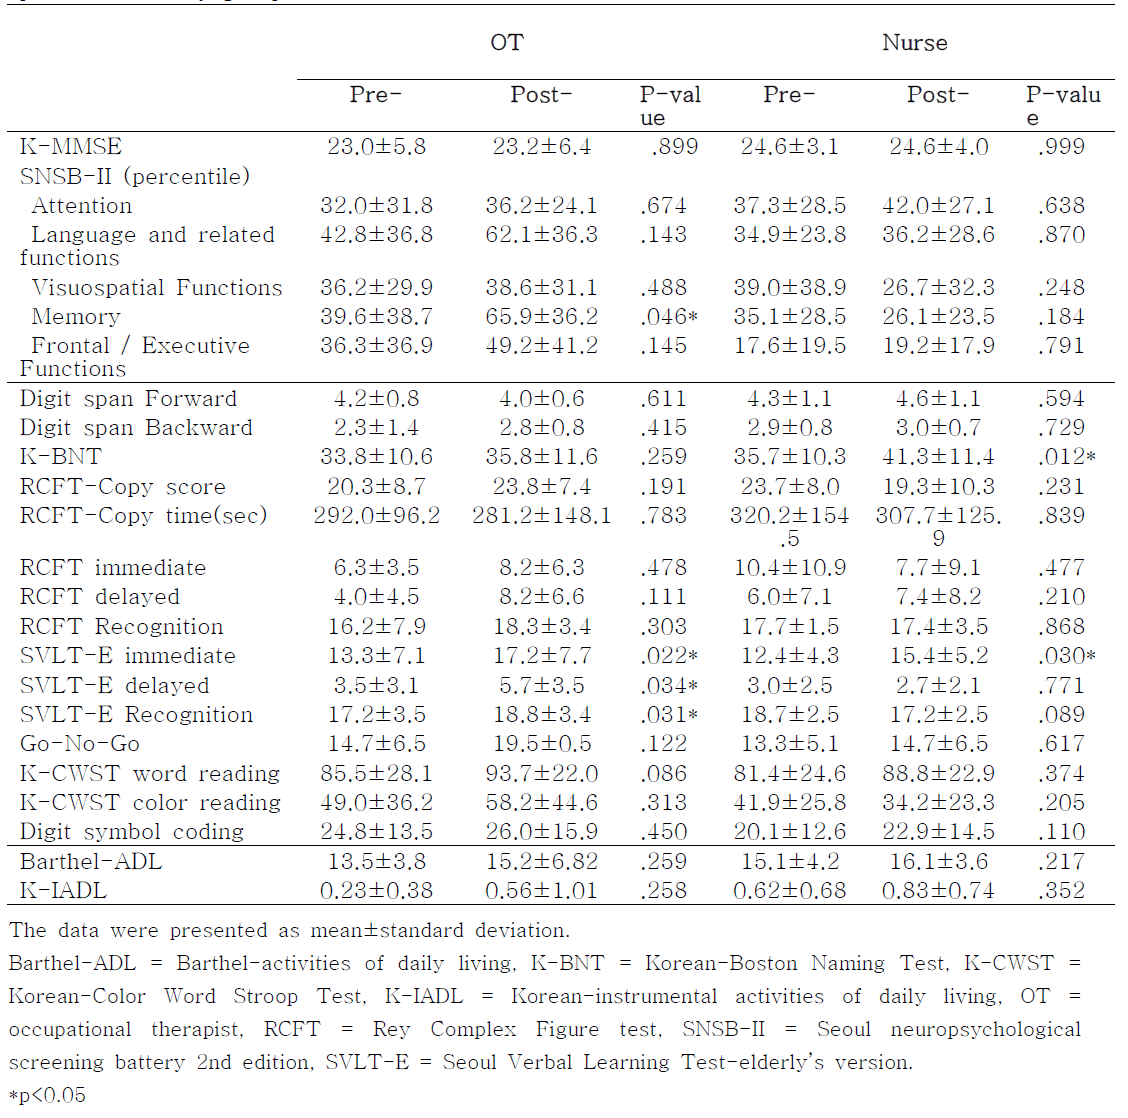 Comparison cognitive function and activity of daily living between pretreatment and posttreatment by group